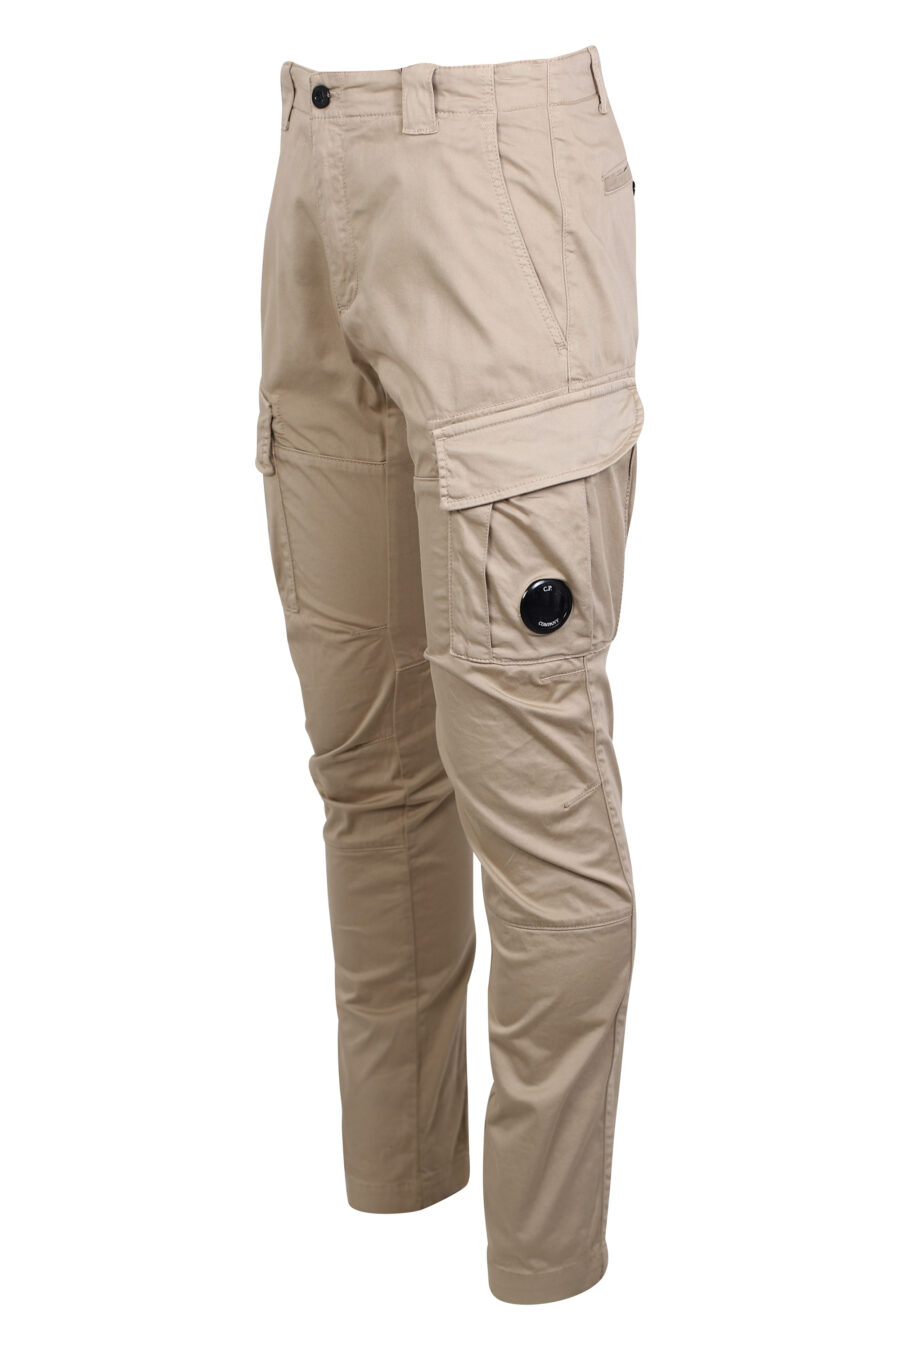 New Look Drawstring Formal Cargo Trousers  Brown  verycouk